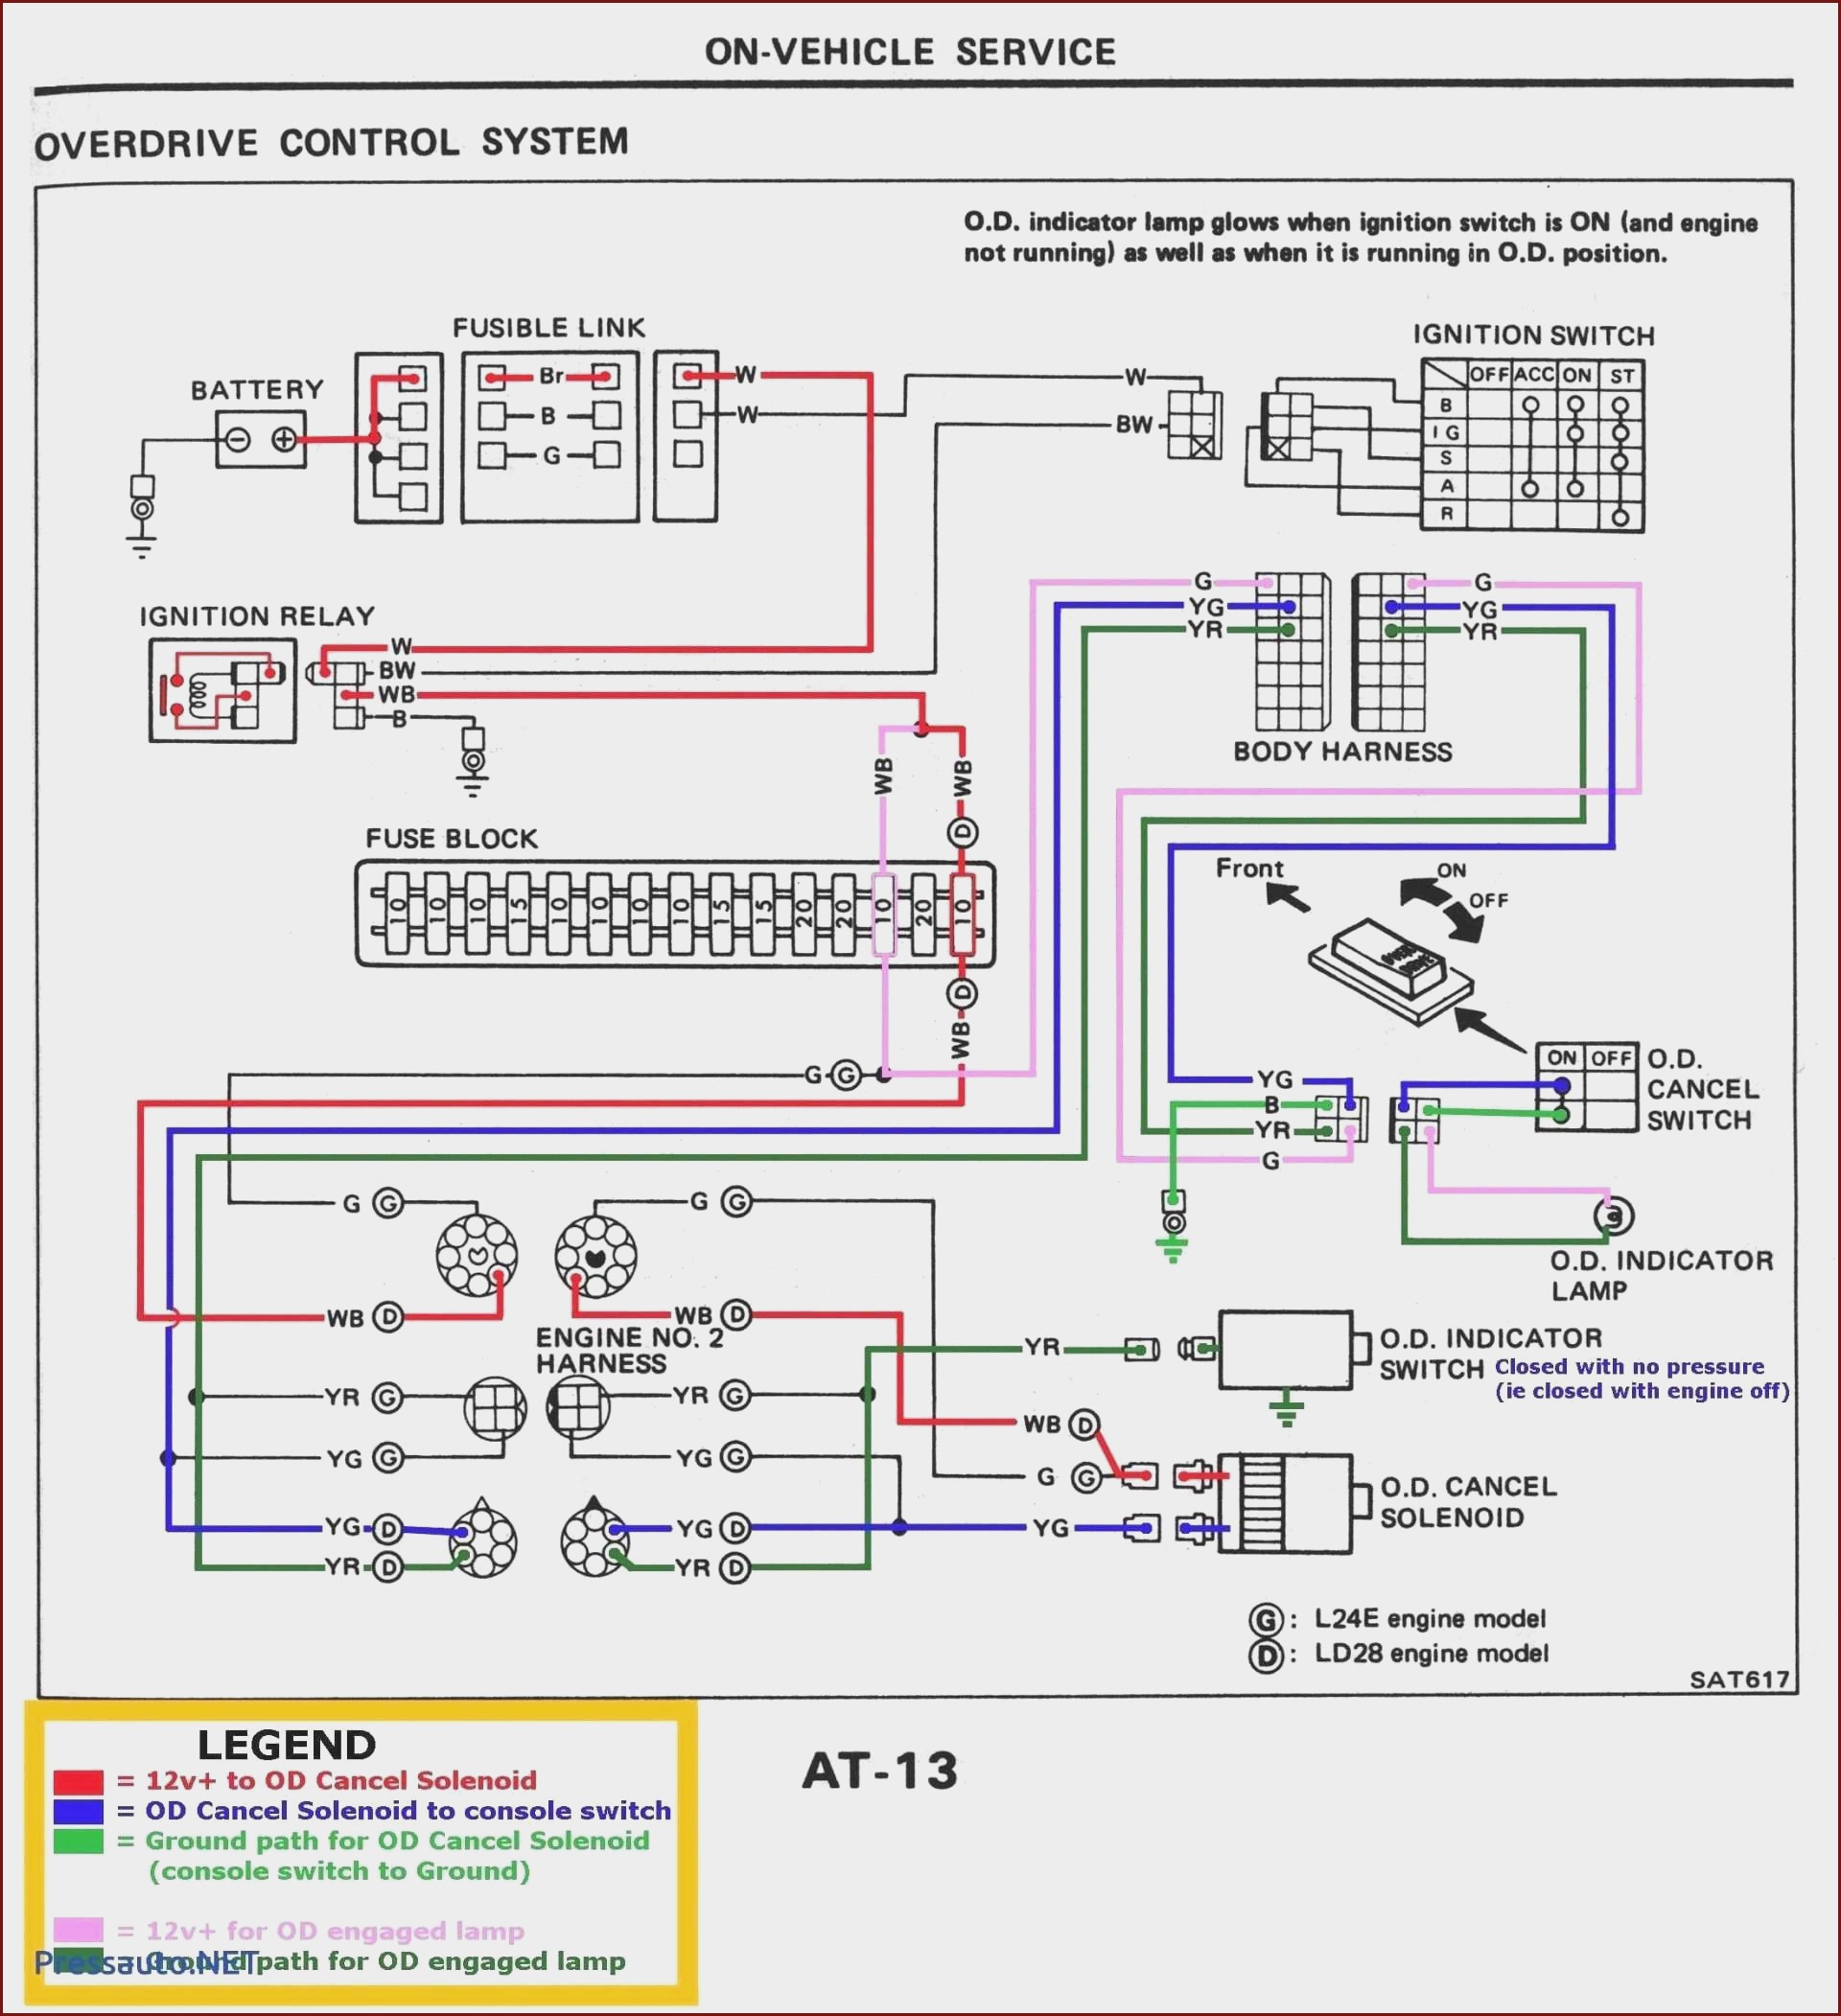 Volvo Truck Fuse Box Diagram Fleetwood Motorhome Wiring Diagram Fuse at Manuals Library Of Volvo Truck Fuse Box Diagram